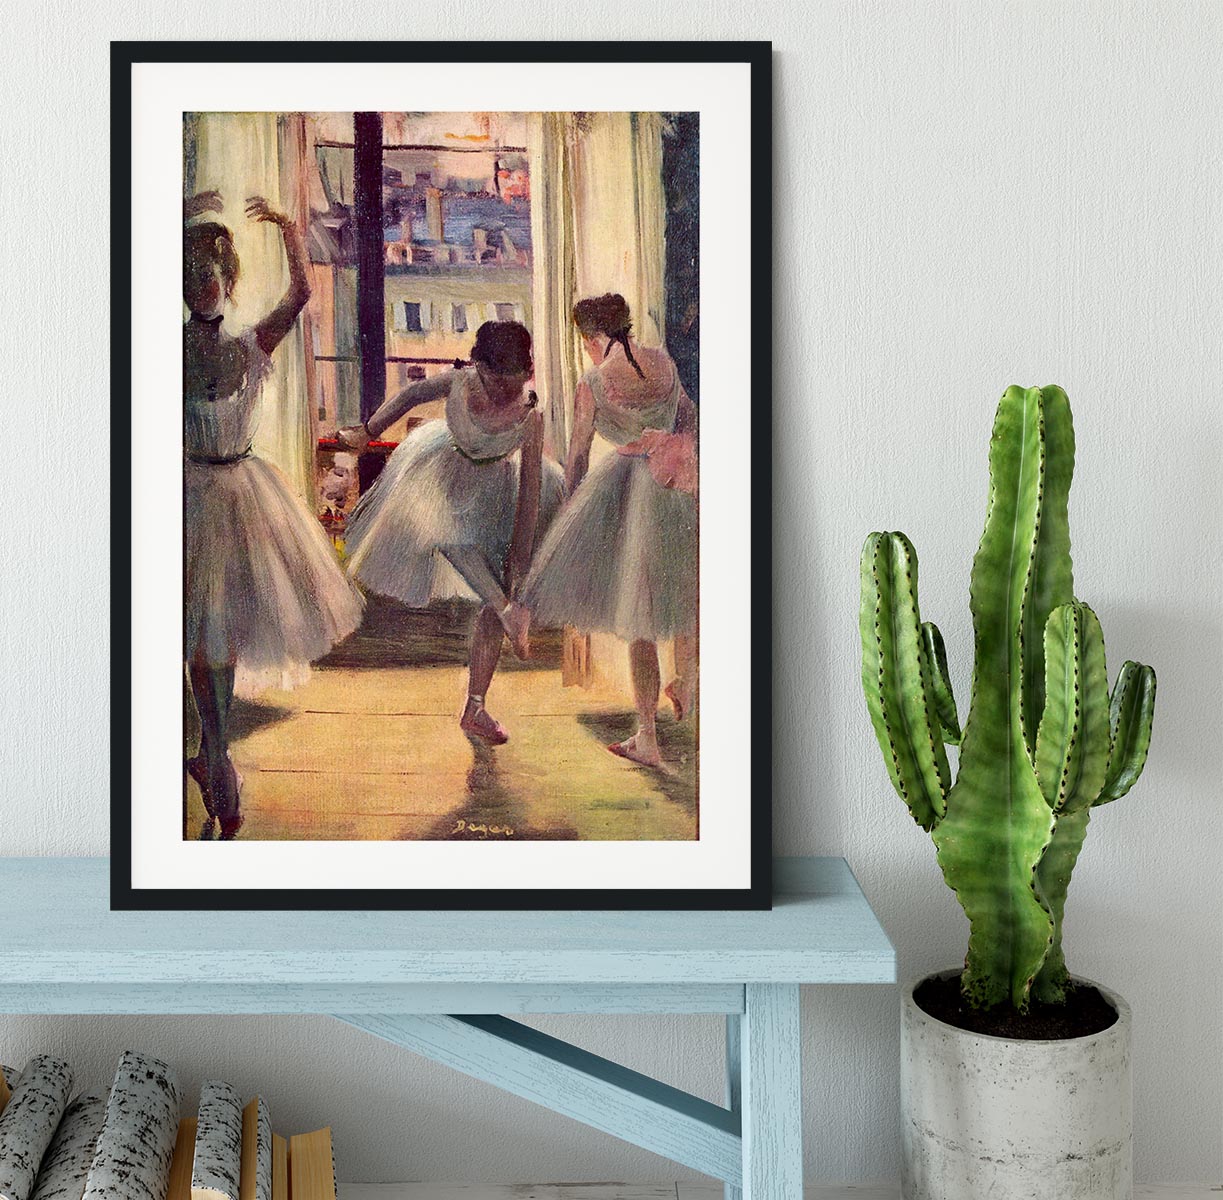 Three dancers in a practice room by Degas Framed Print - Canvas Art Rocks - 1